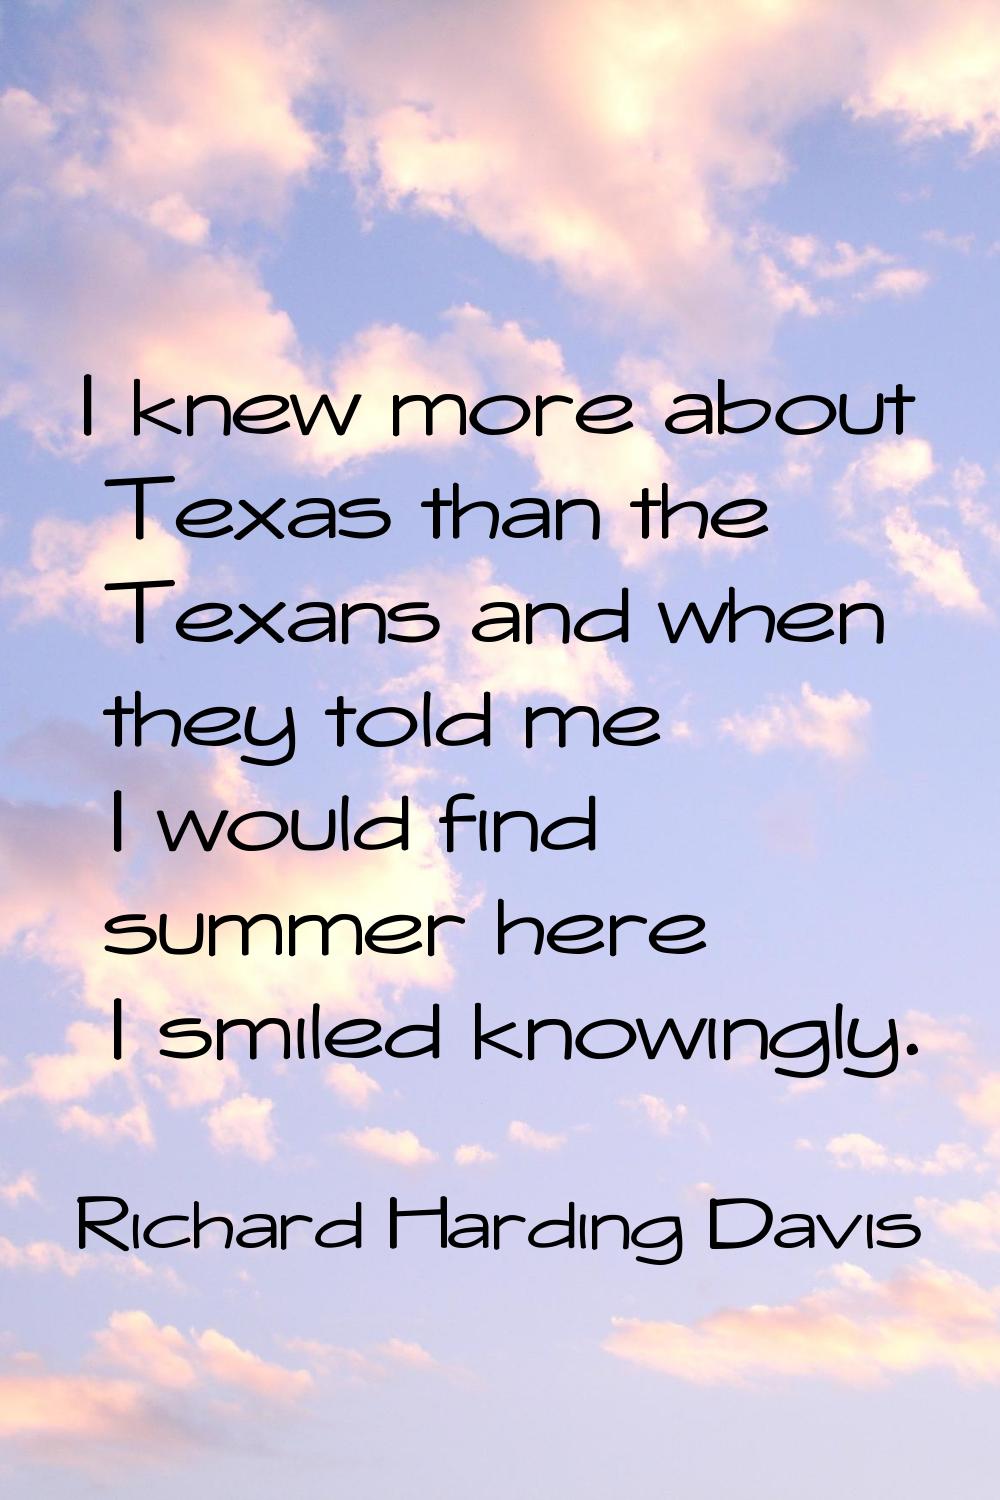 I knew more about Texas than the Texans and when they told me I would find summer here I smiled kno